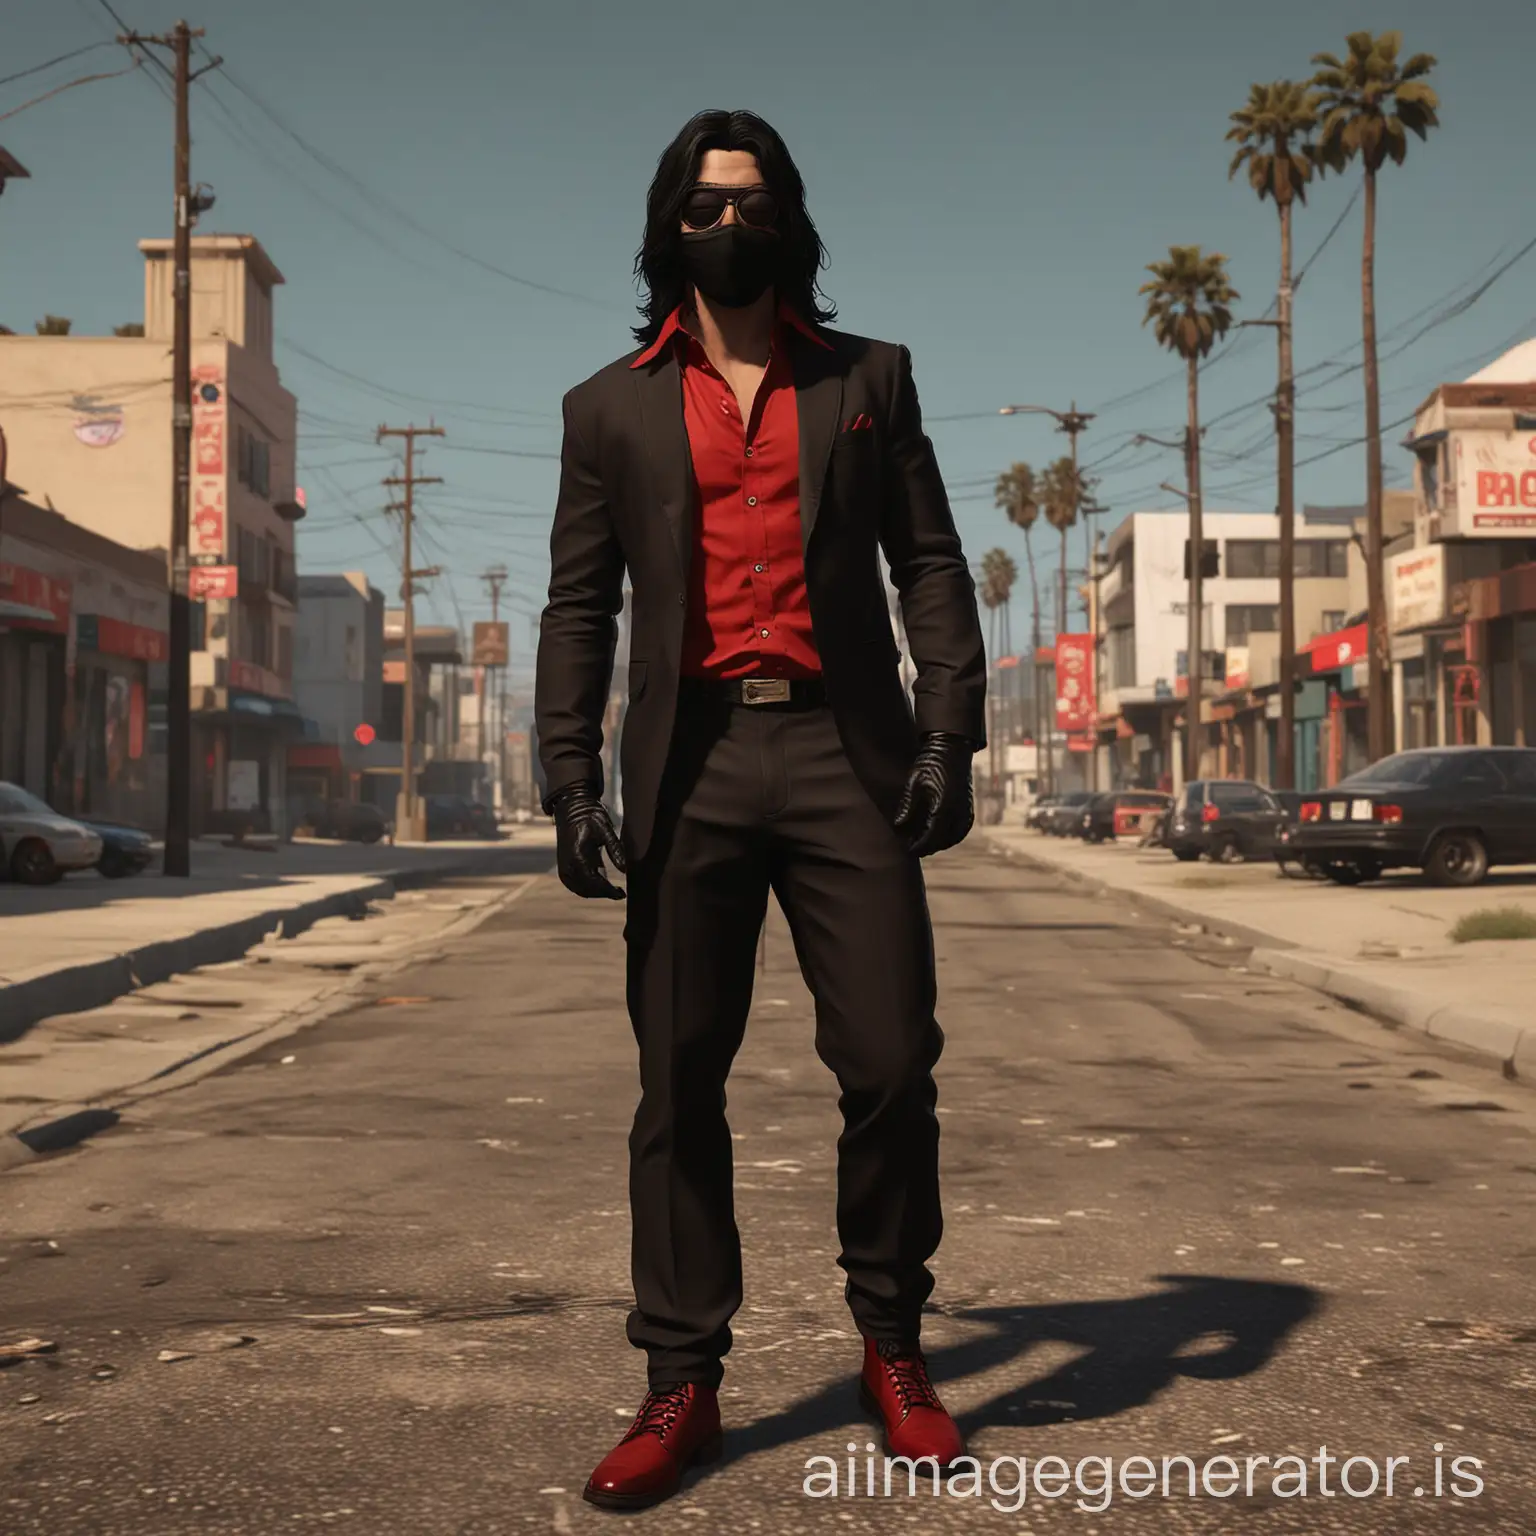 Make me a film post of one guy with red shirt and black suit and red pants, and black shoes, with long black hair and wearing a black mask covering his mouth and wearing sun glasses, and black gloves also, and put Vollmond’s title on the top of this post in gta style